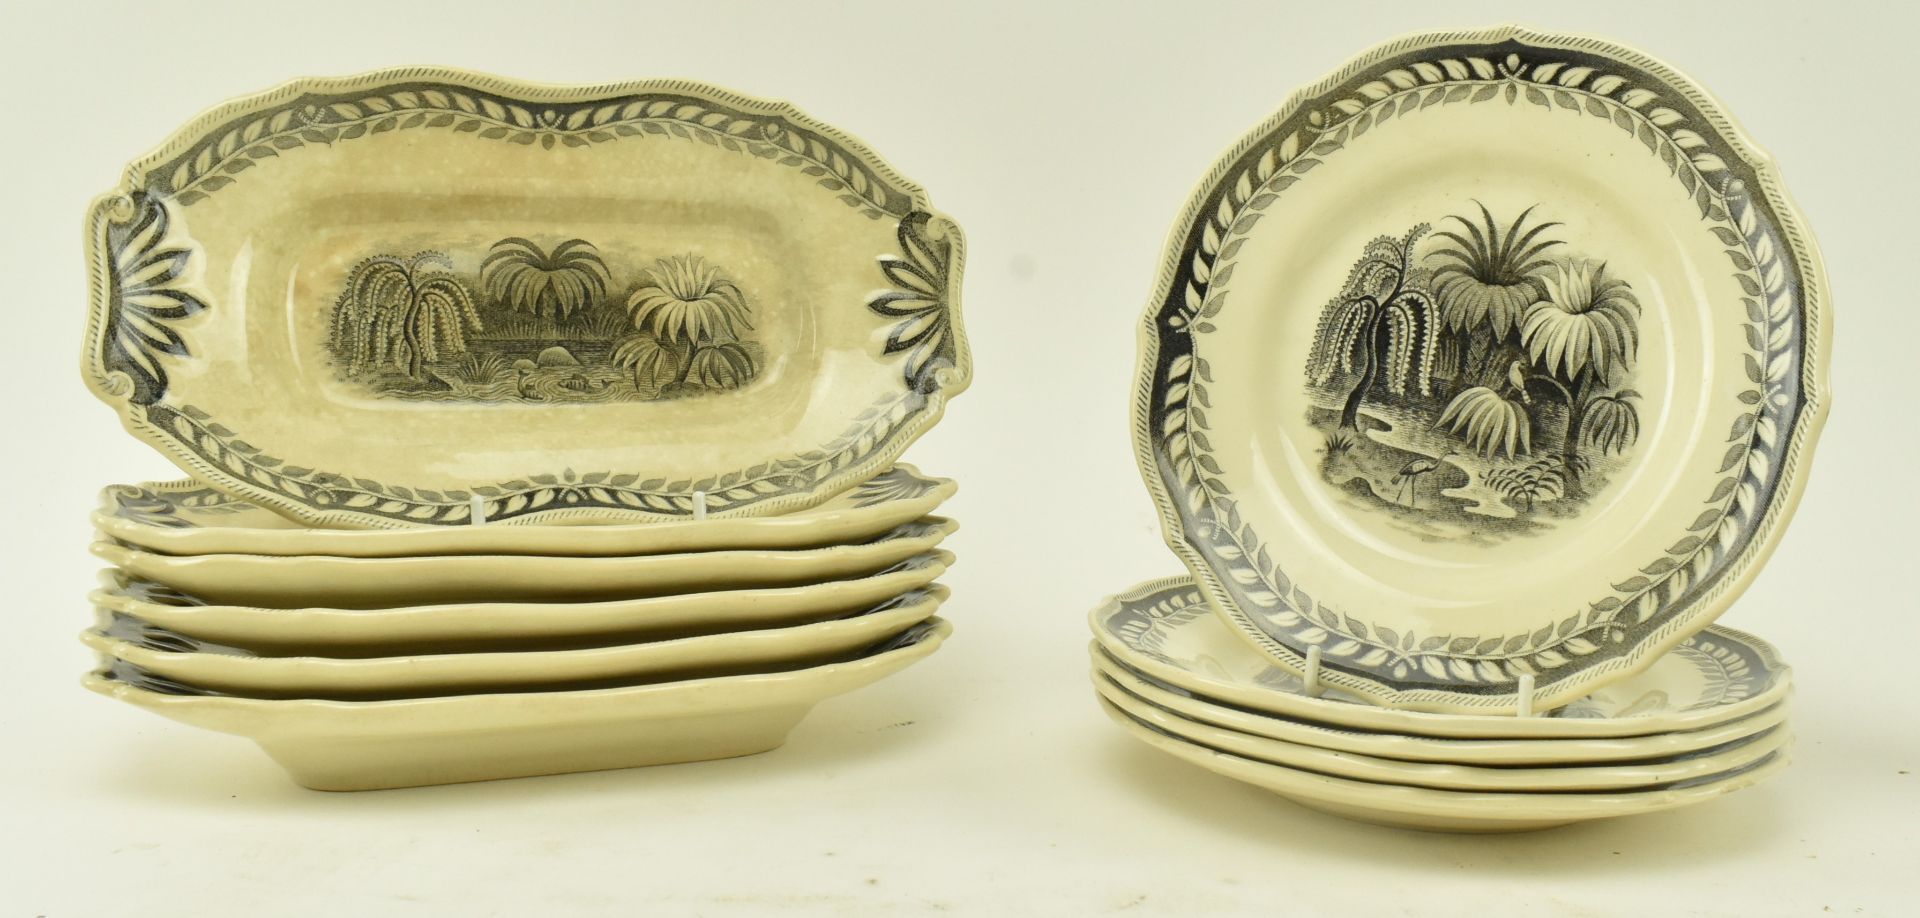 ARTHUR PERCY - EXOTICA - EARLY 20TH CENTURY PART DINNER SERVICE - Image 4 of 13